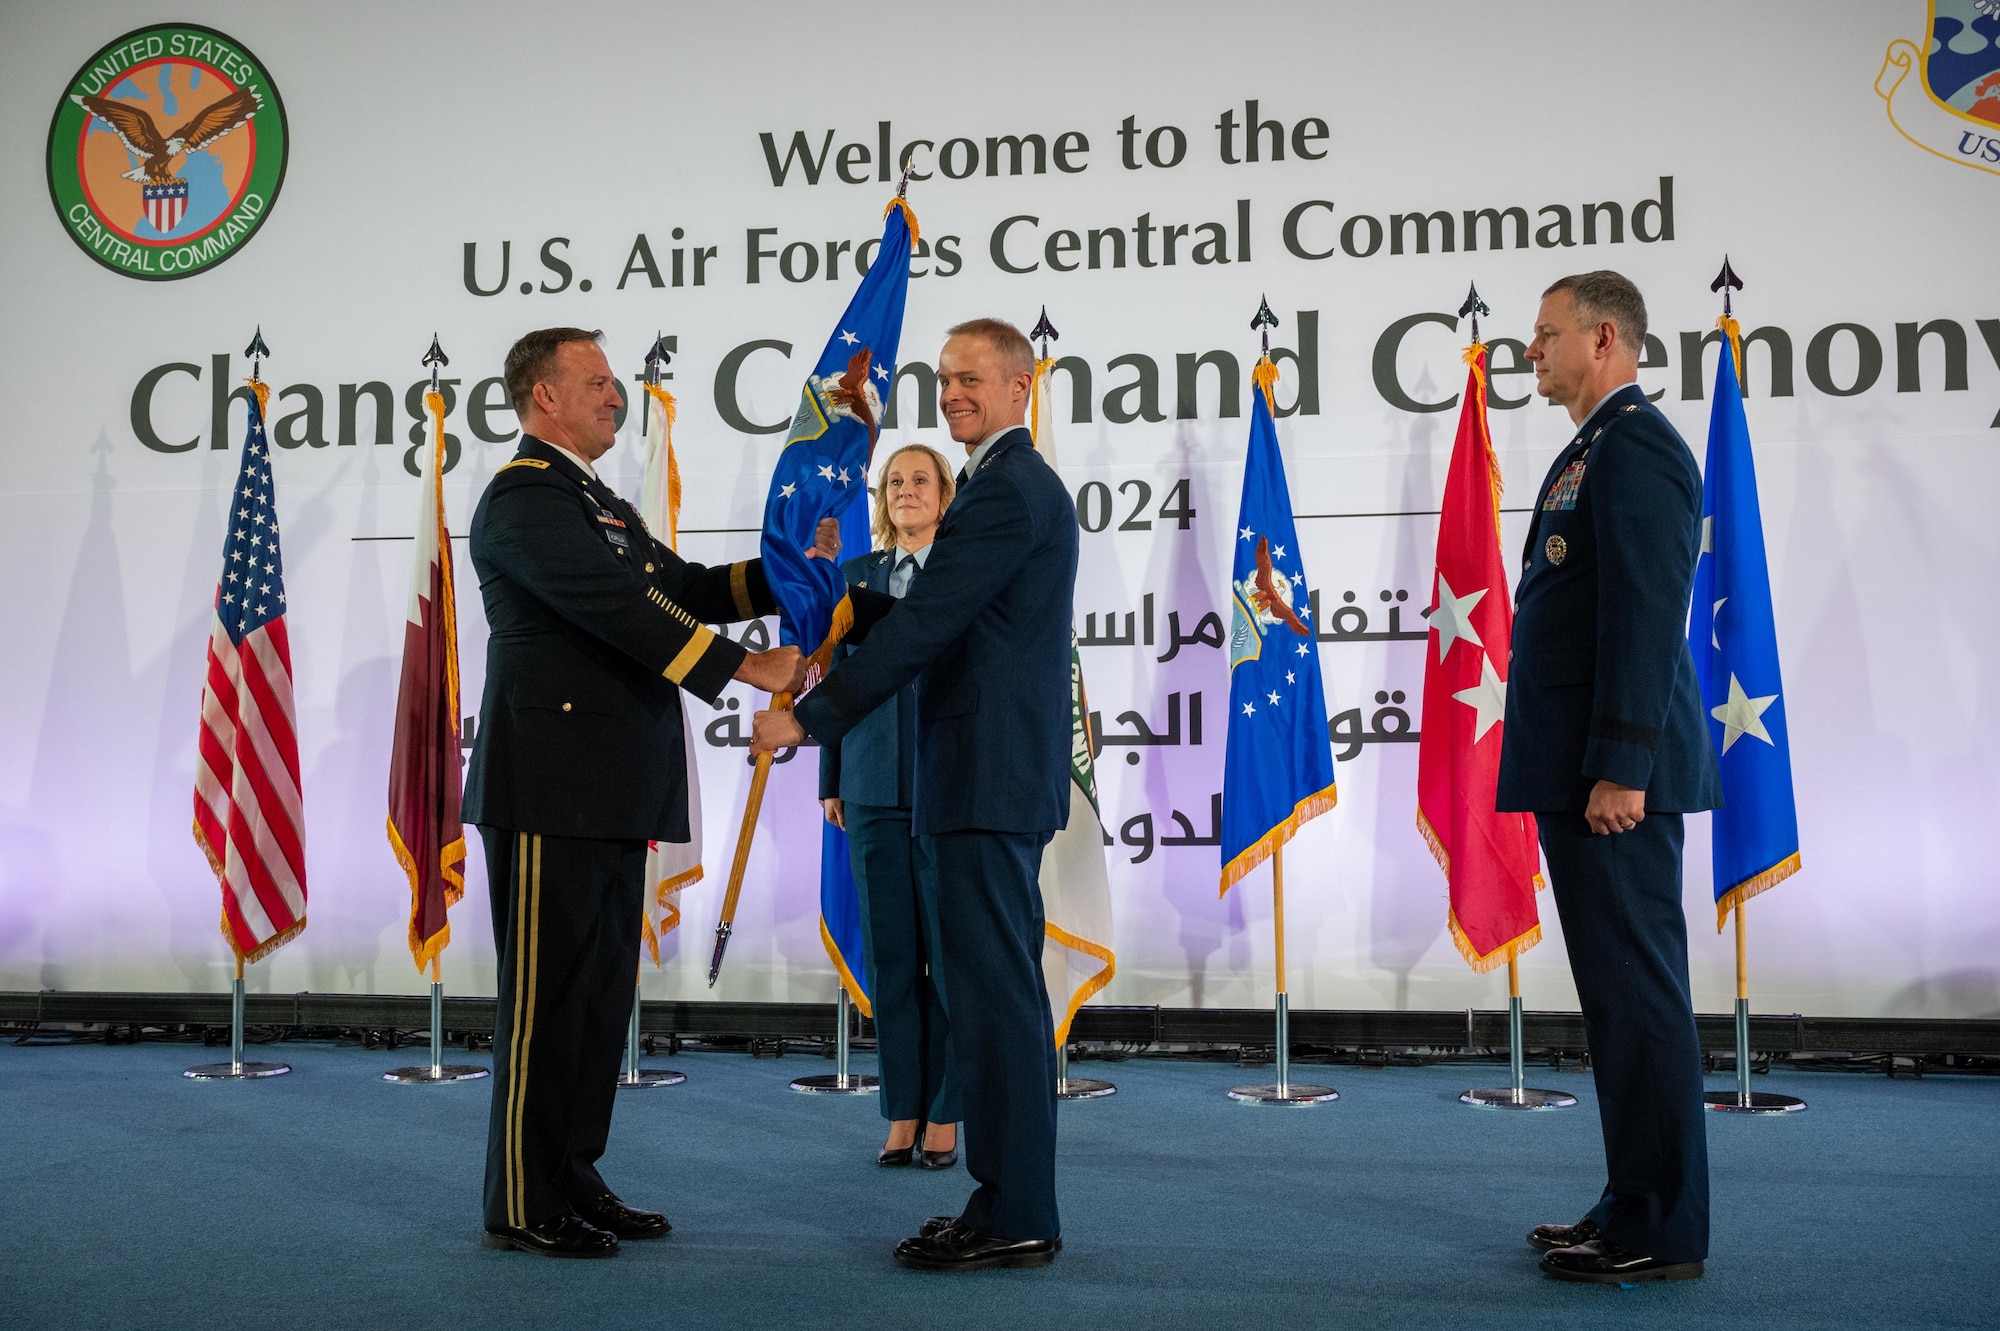 U.S. Army Gen. Michael E. Kurilla (left), U.S. Central Command commander, passes the ceremonial guidon to U.S. Air Force Lt. Gen. Derek France (center), commander of Ninth Air Force (Air Forces Central), during a change of command ceremony at Al Udeid Air Base, Qatar, April 18, 2024. France takes command of over 15,000 personnel across five air expeditionary wings working alongside regional and coalition partners to stabilize the CENTCOM area of responsibility. (U.S. Air Force photo)